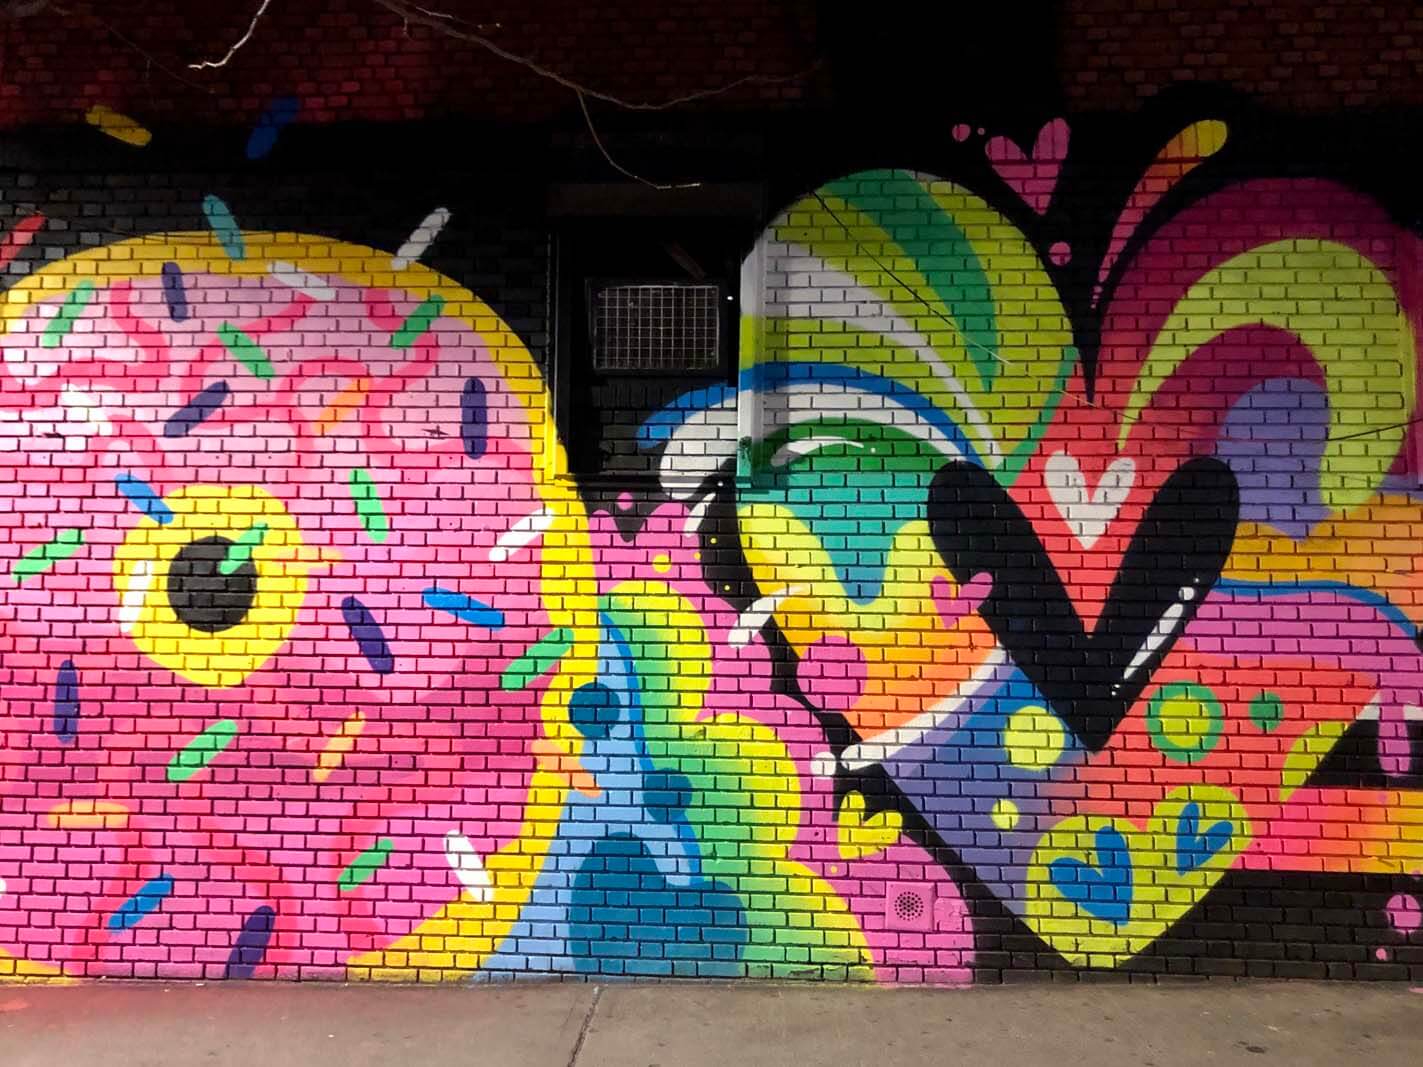 donut and heart Williamsburg mural by Jason Naylor